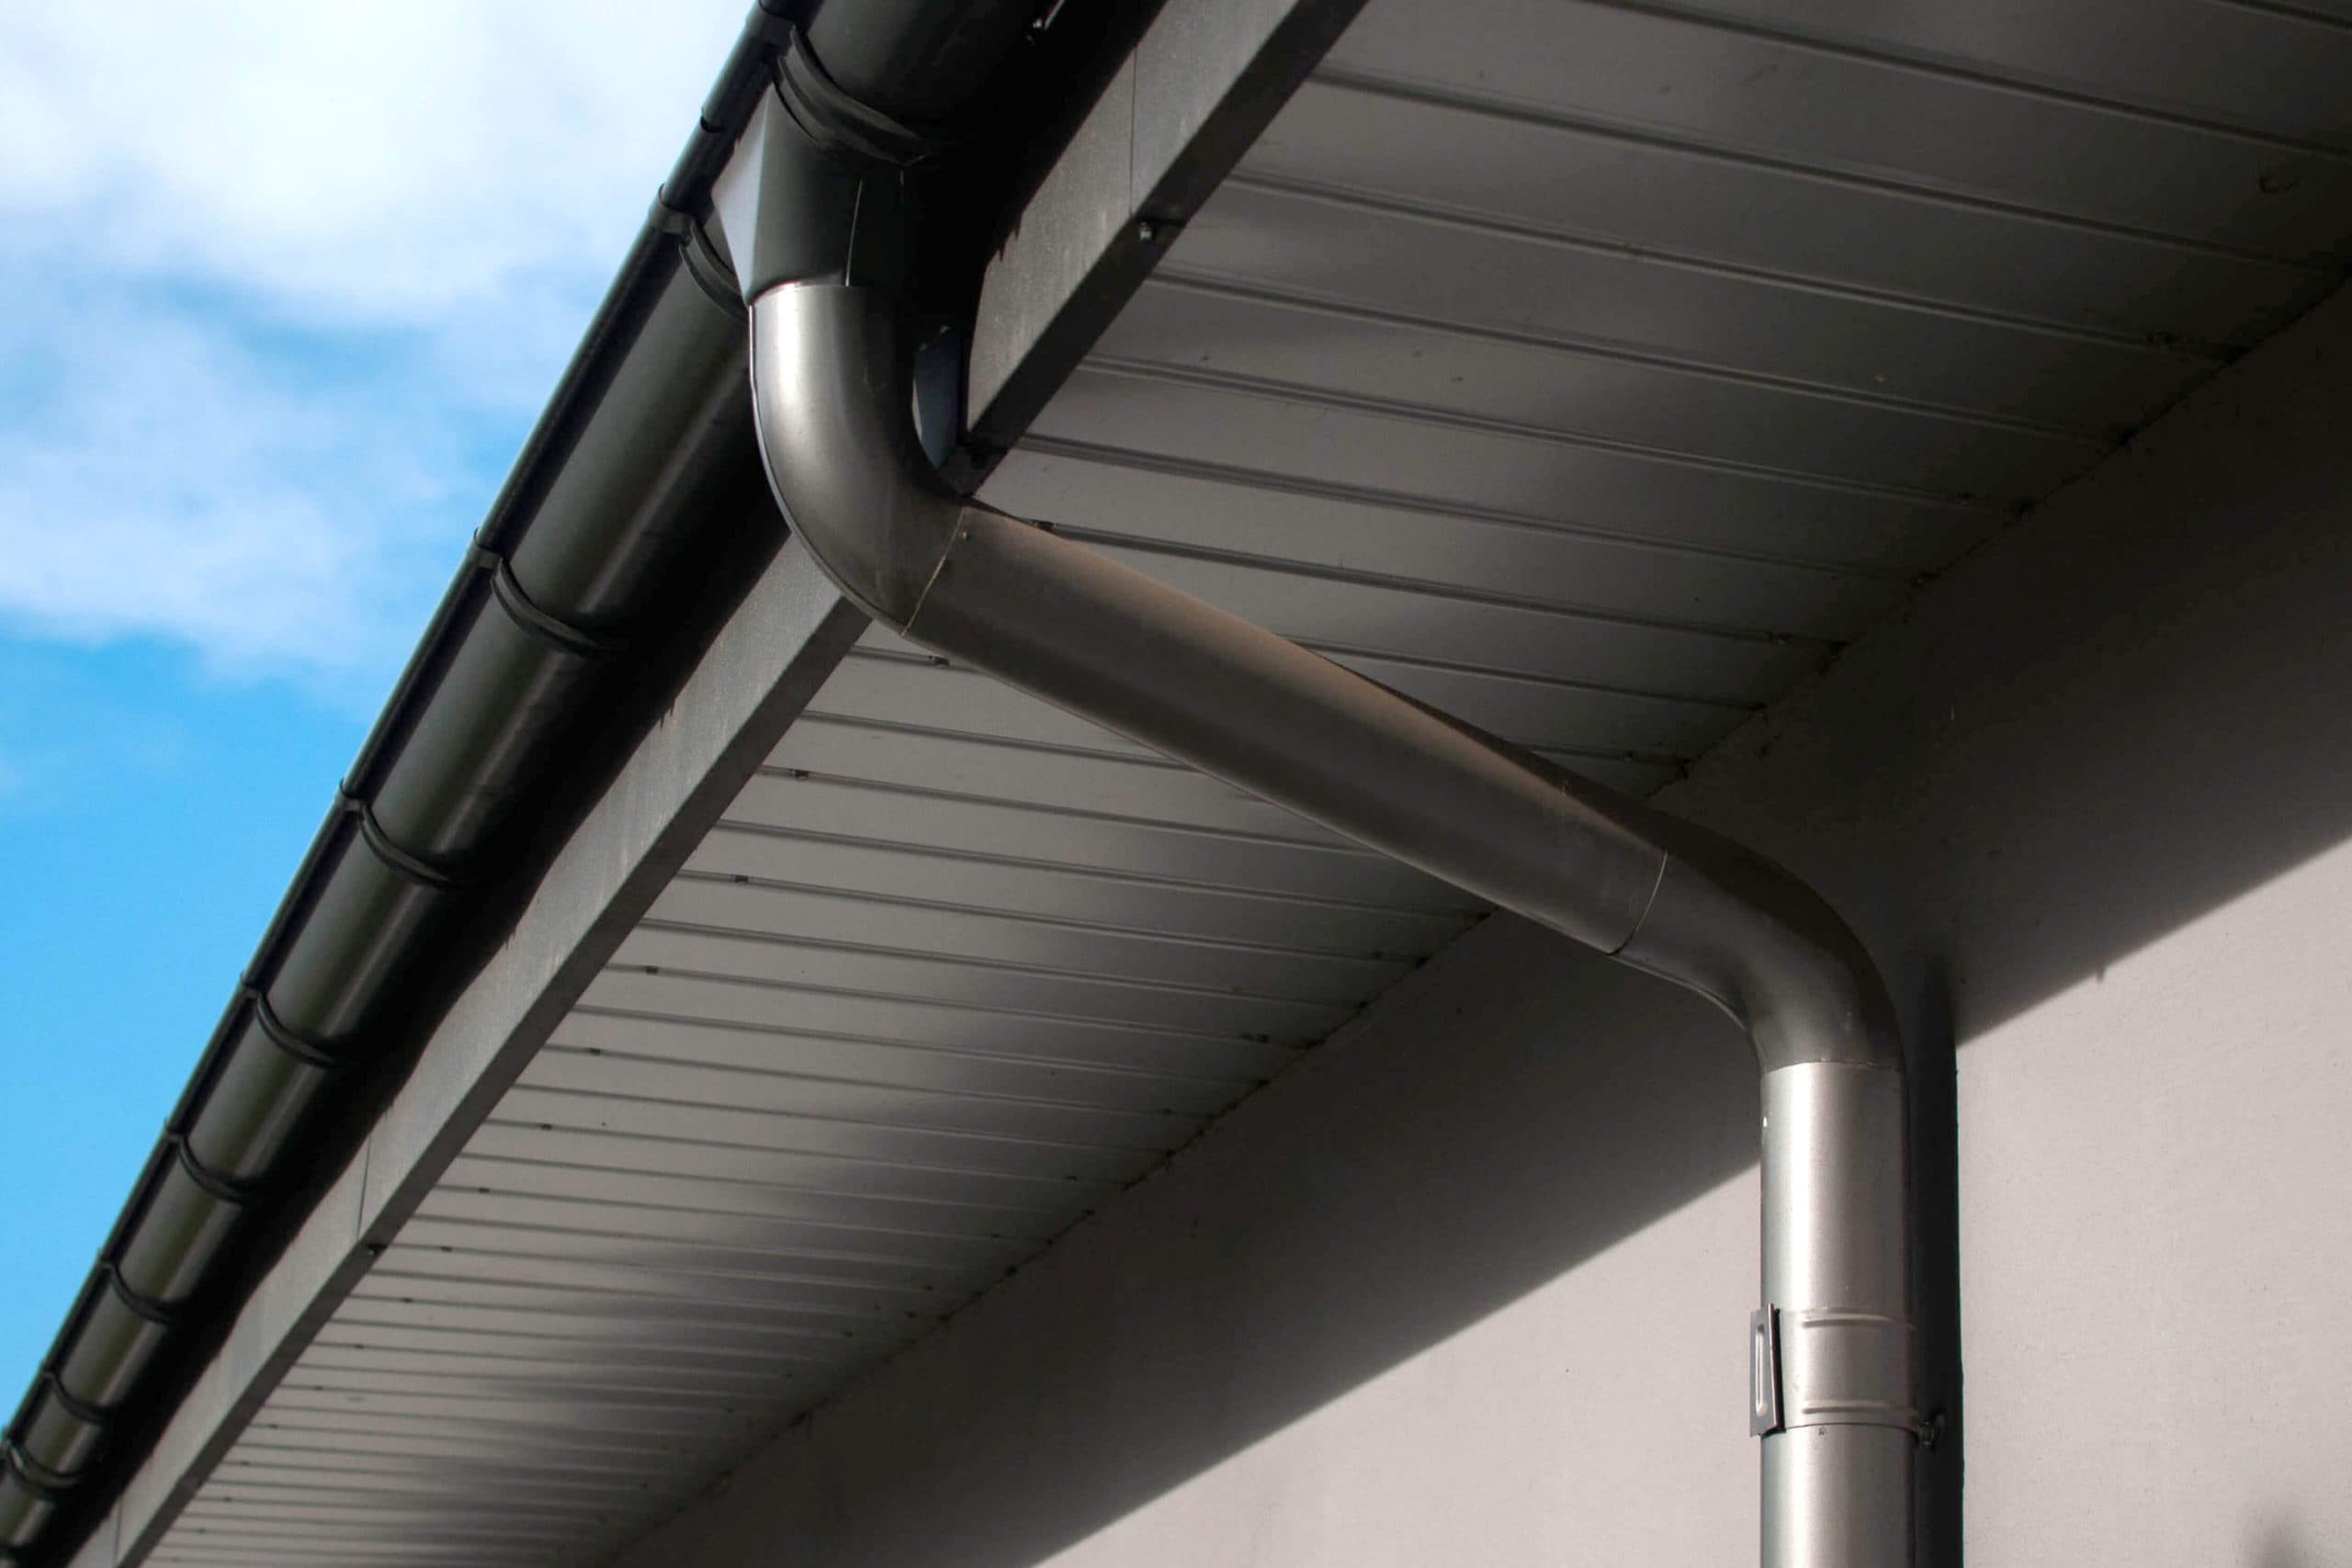 Corrosion-resistant galvanized gutters installed on a commercial building in St. Petersburg